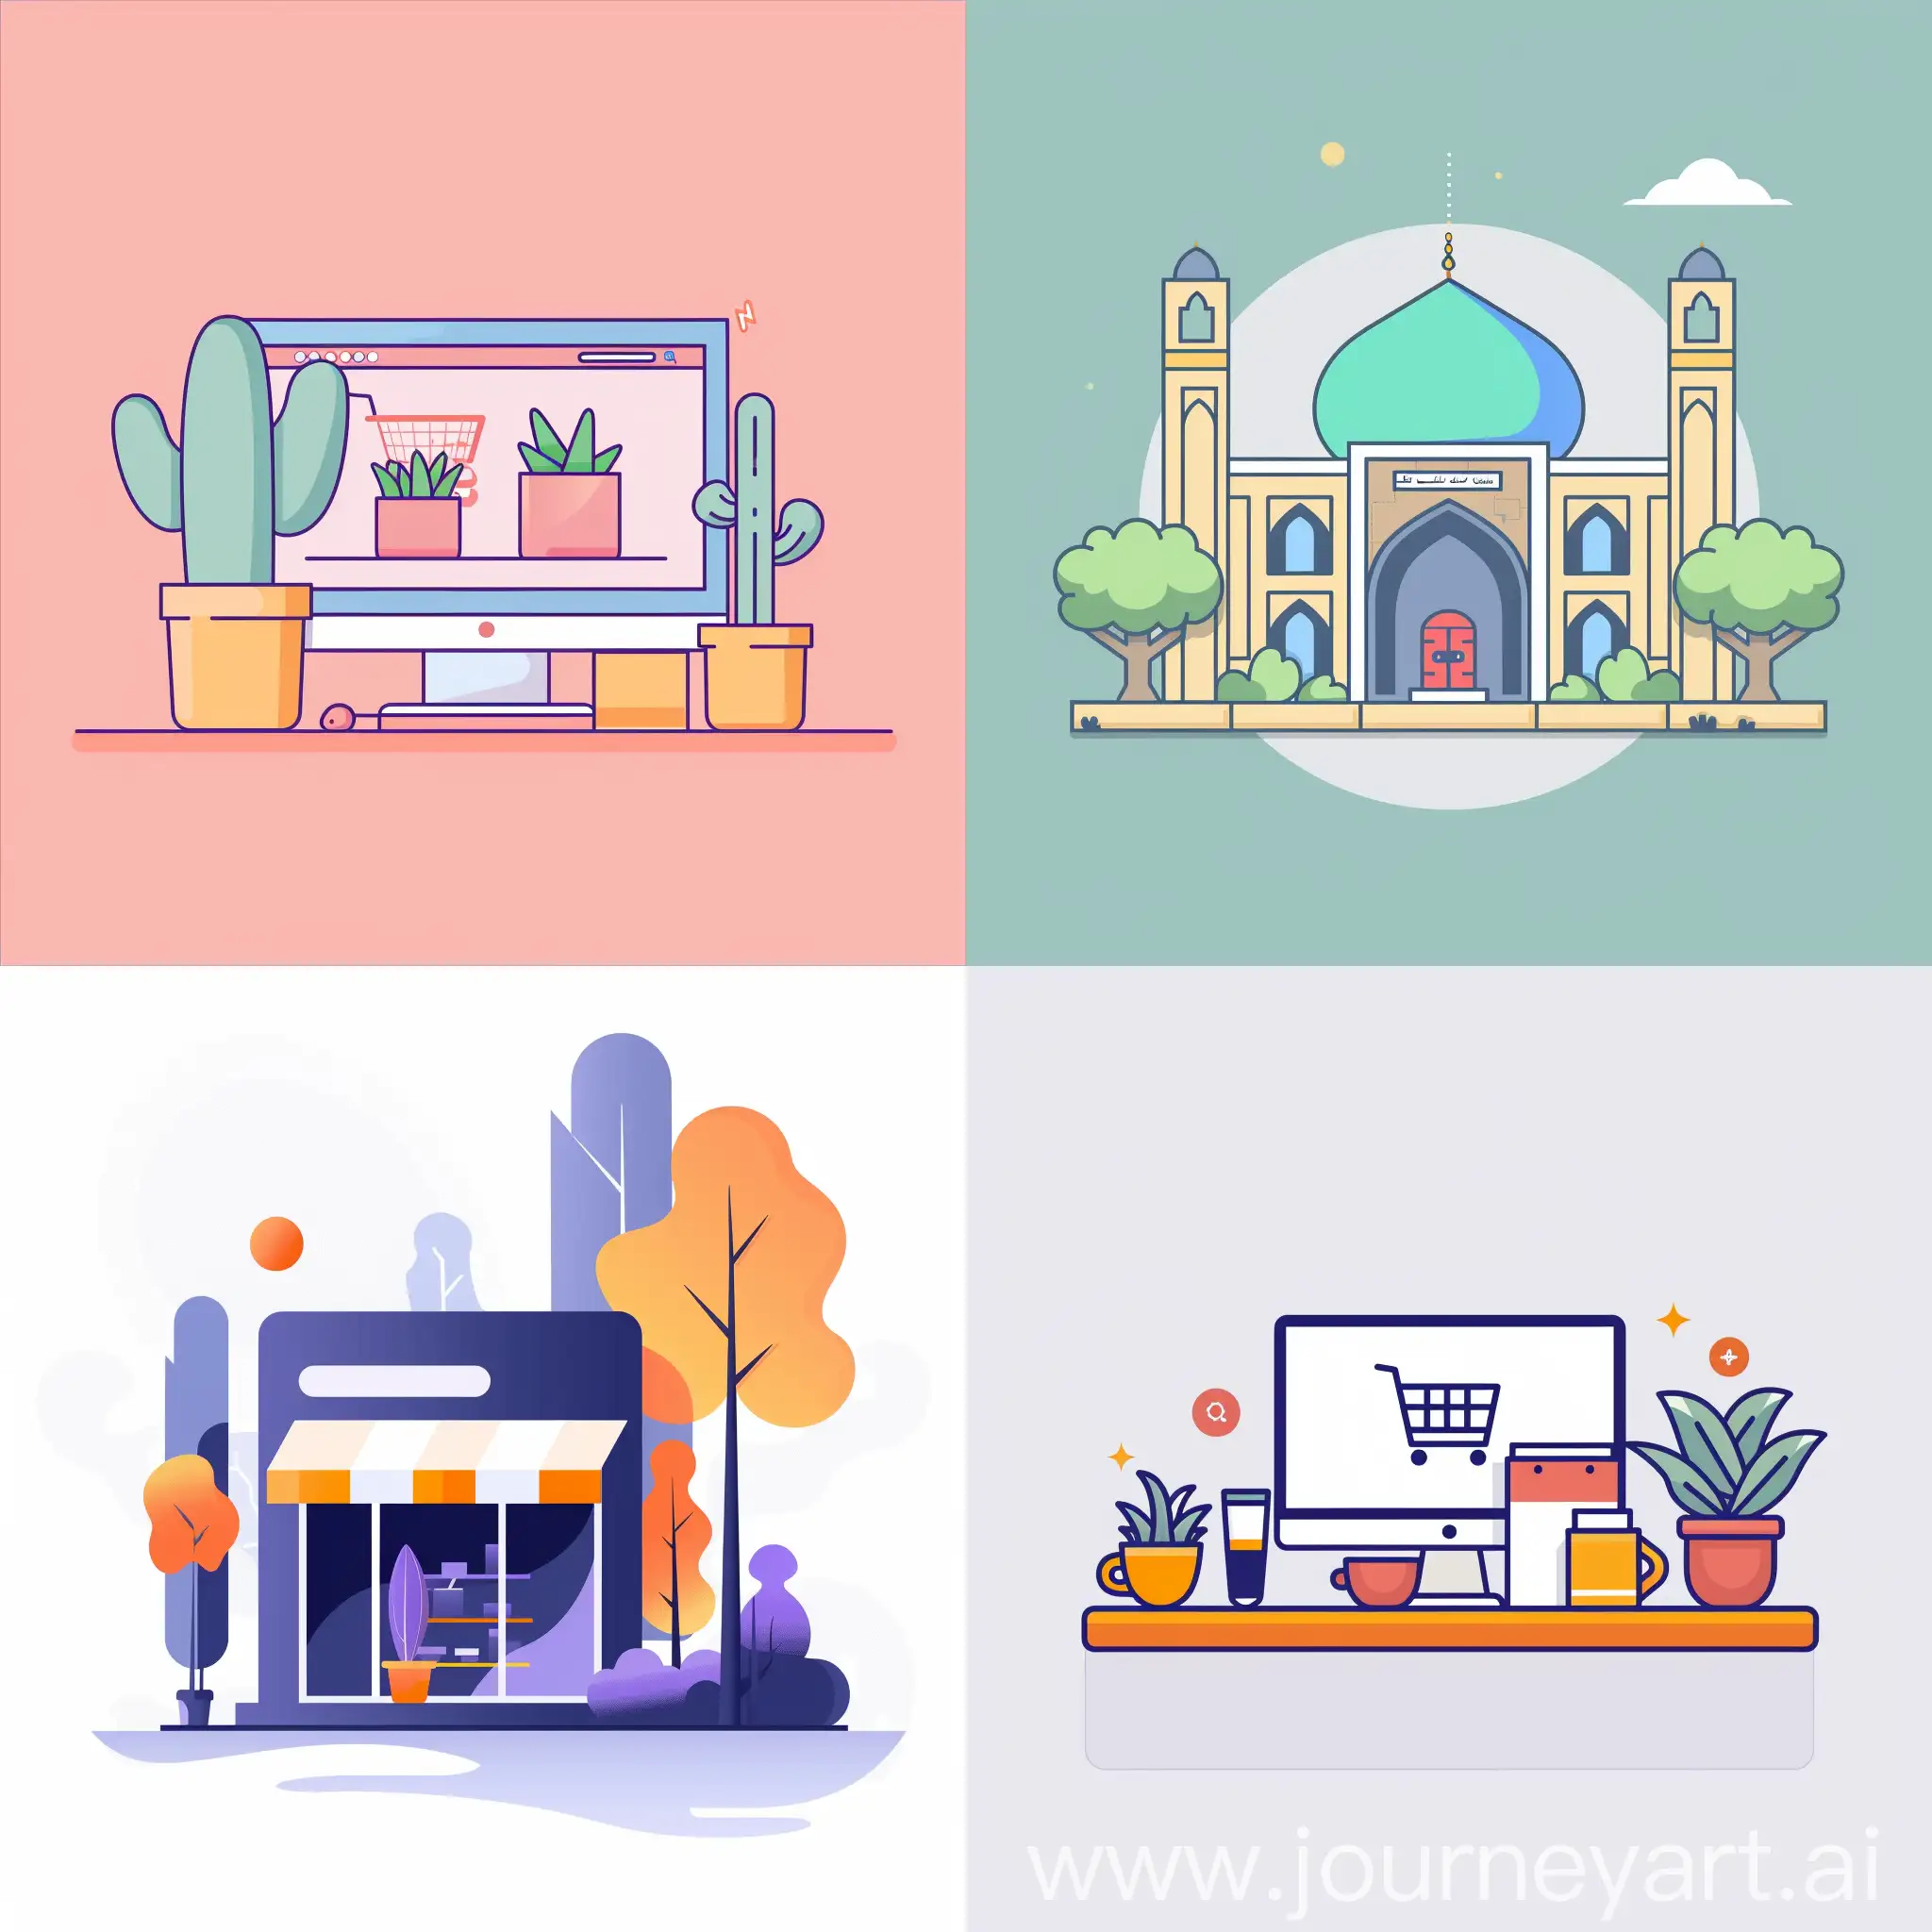 illustration a minimal graphic image about "How to build ecommerce website in Rasht city in Iran" with a plain color background